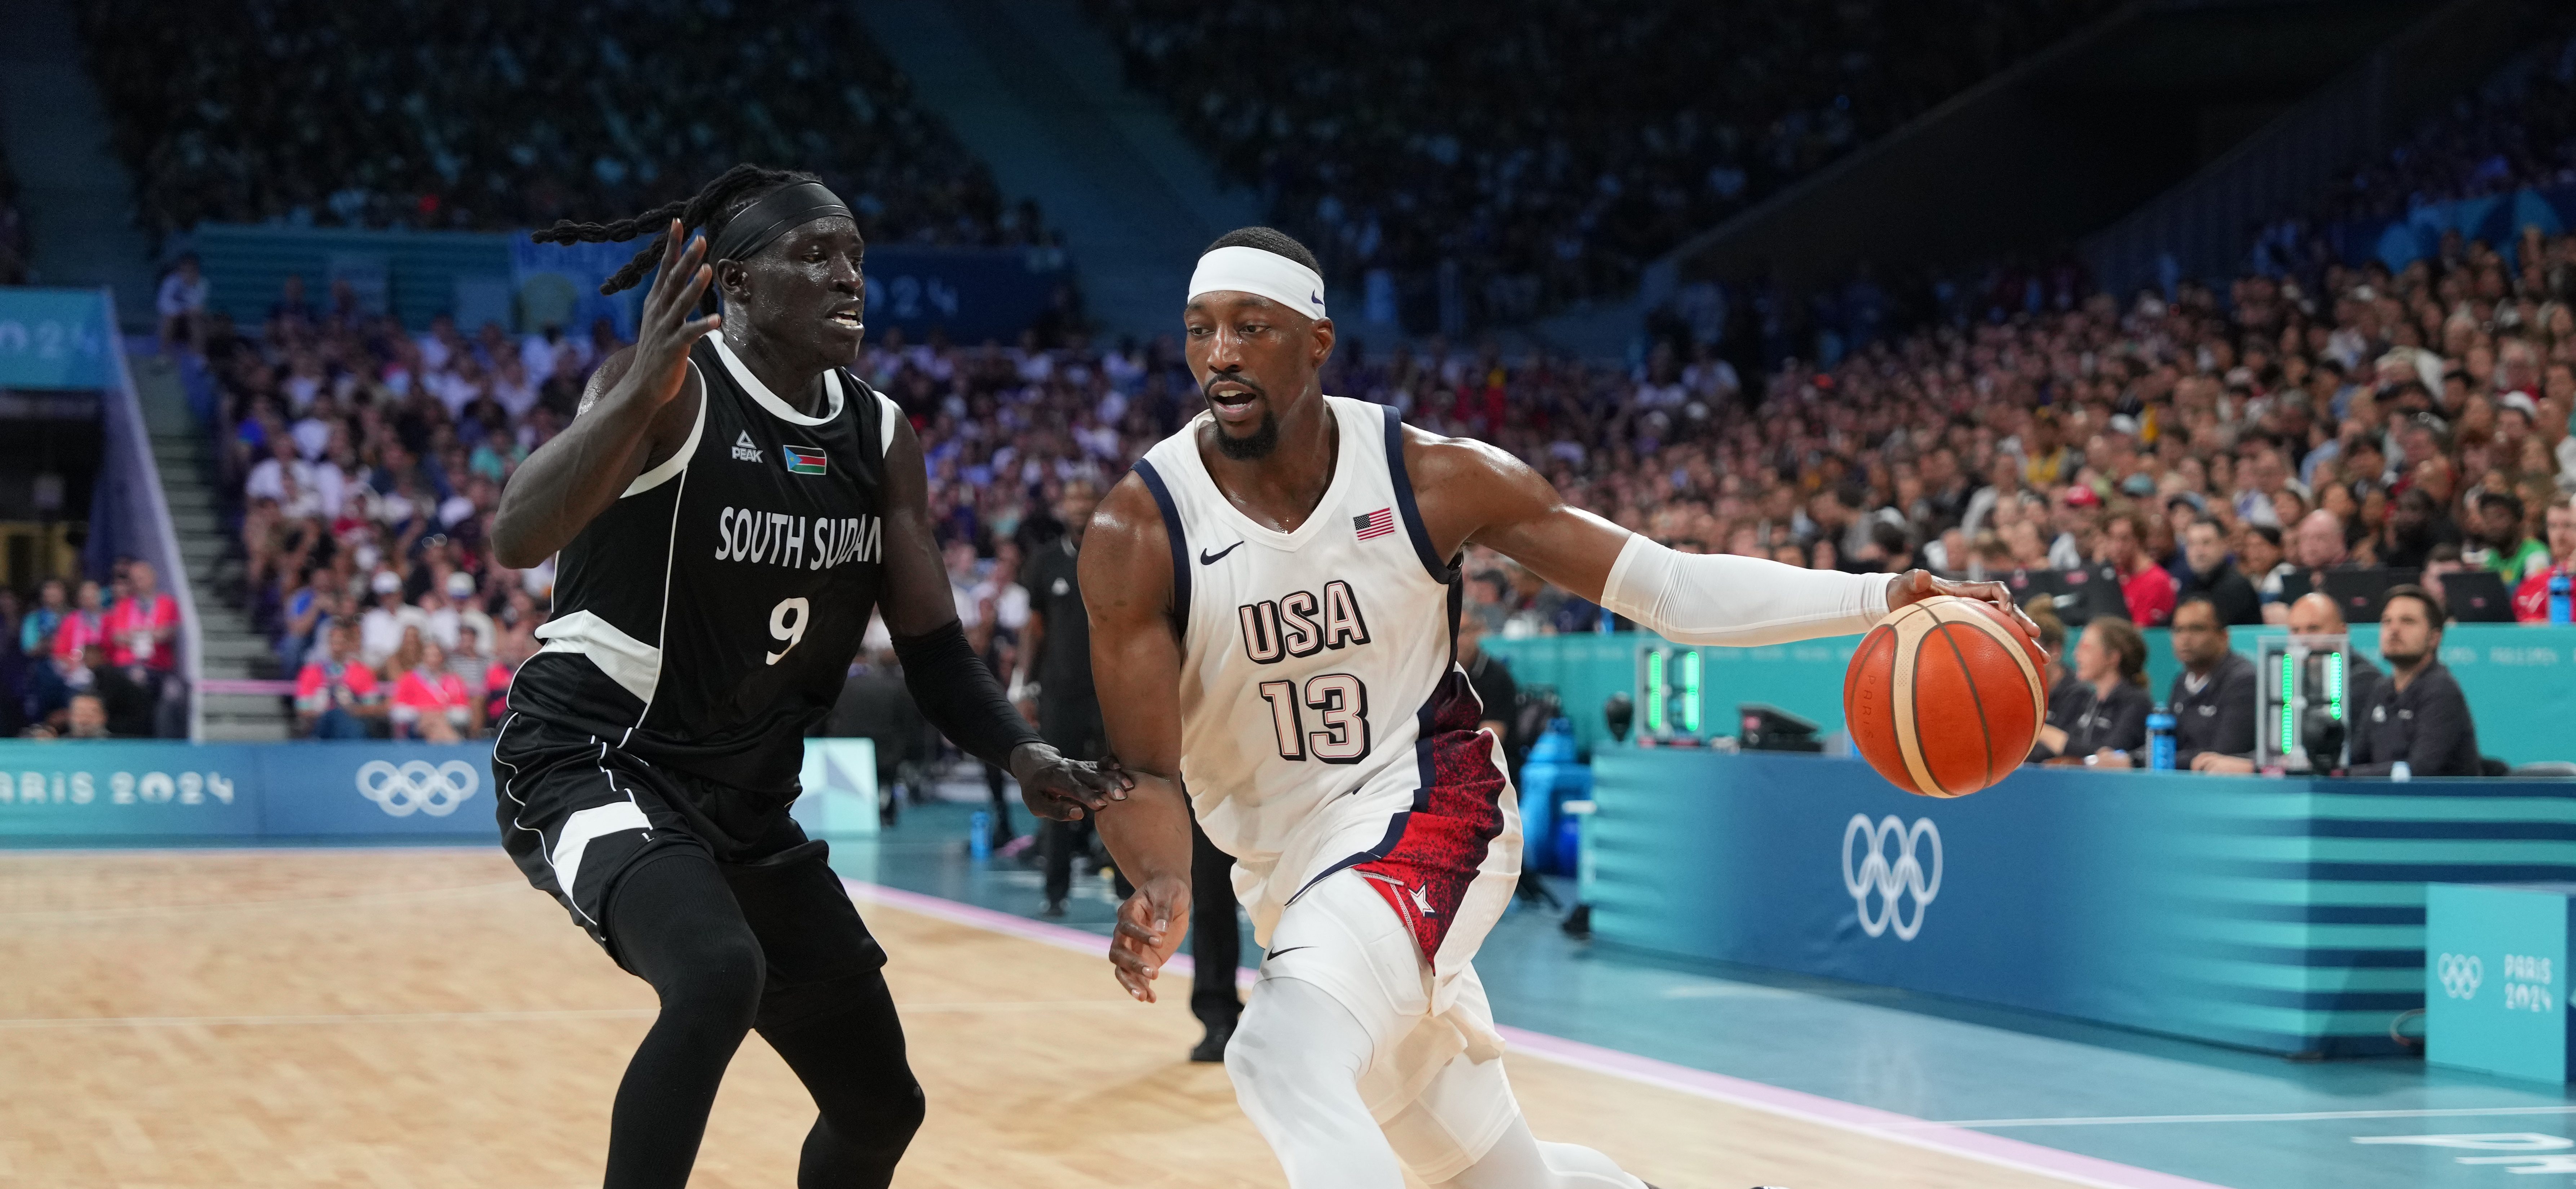 Team USA men's basketball routs South Sudan 103-86, secures Olympic quarterfinals spot